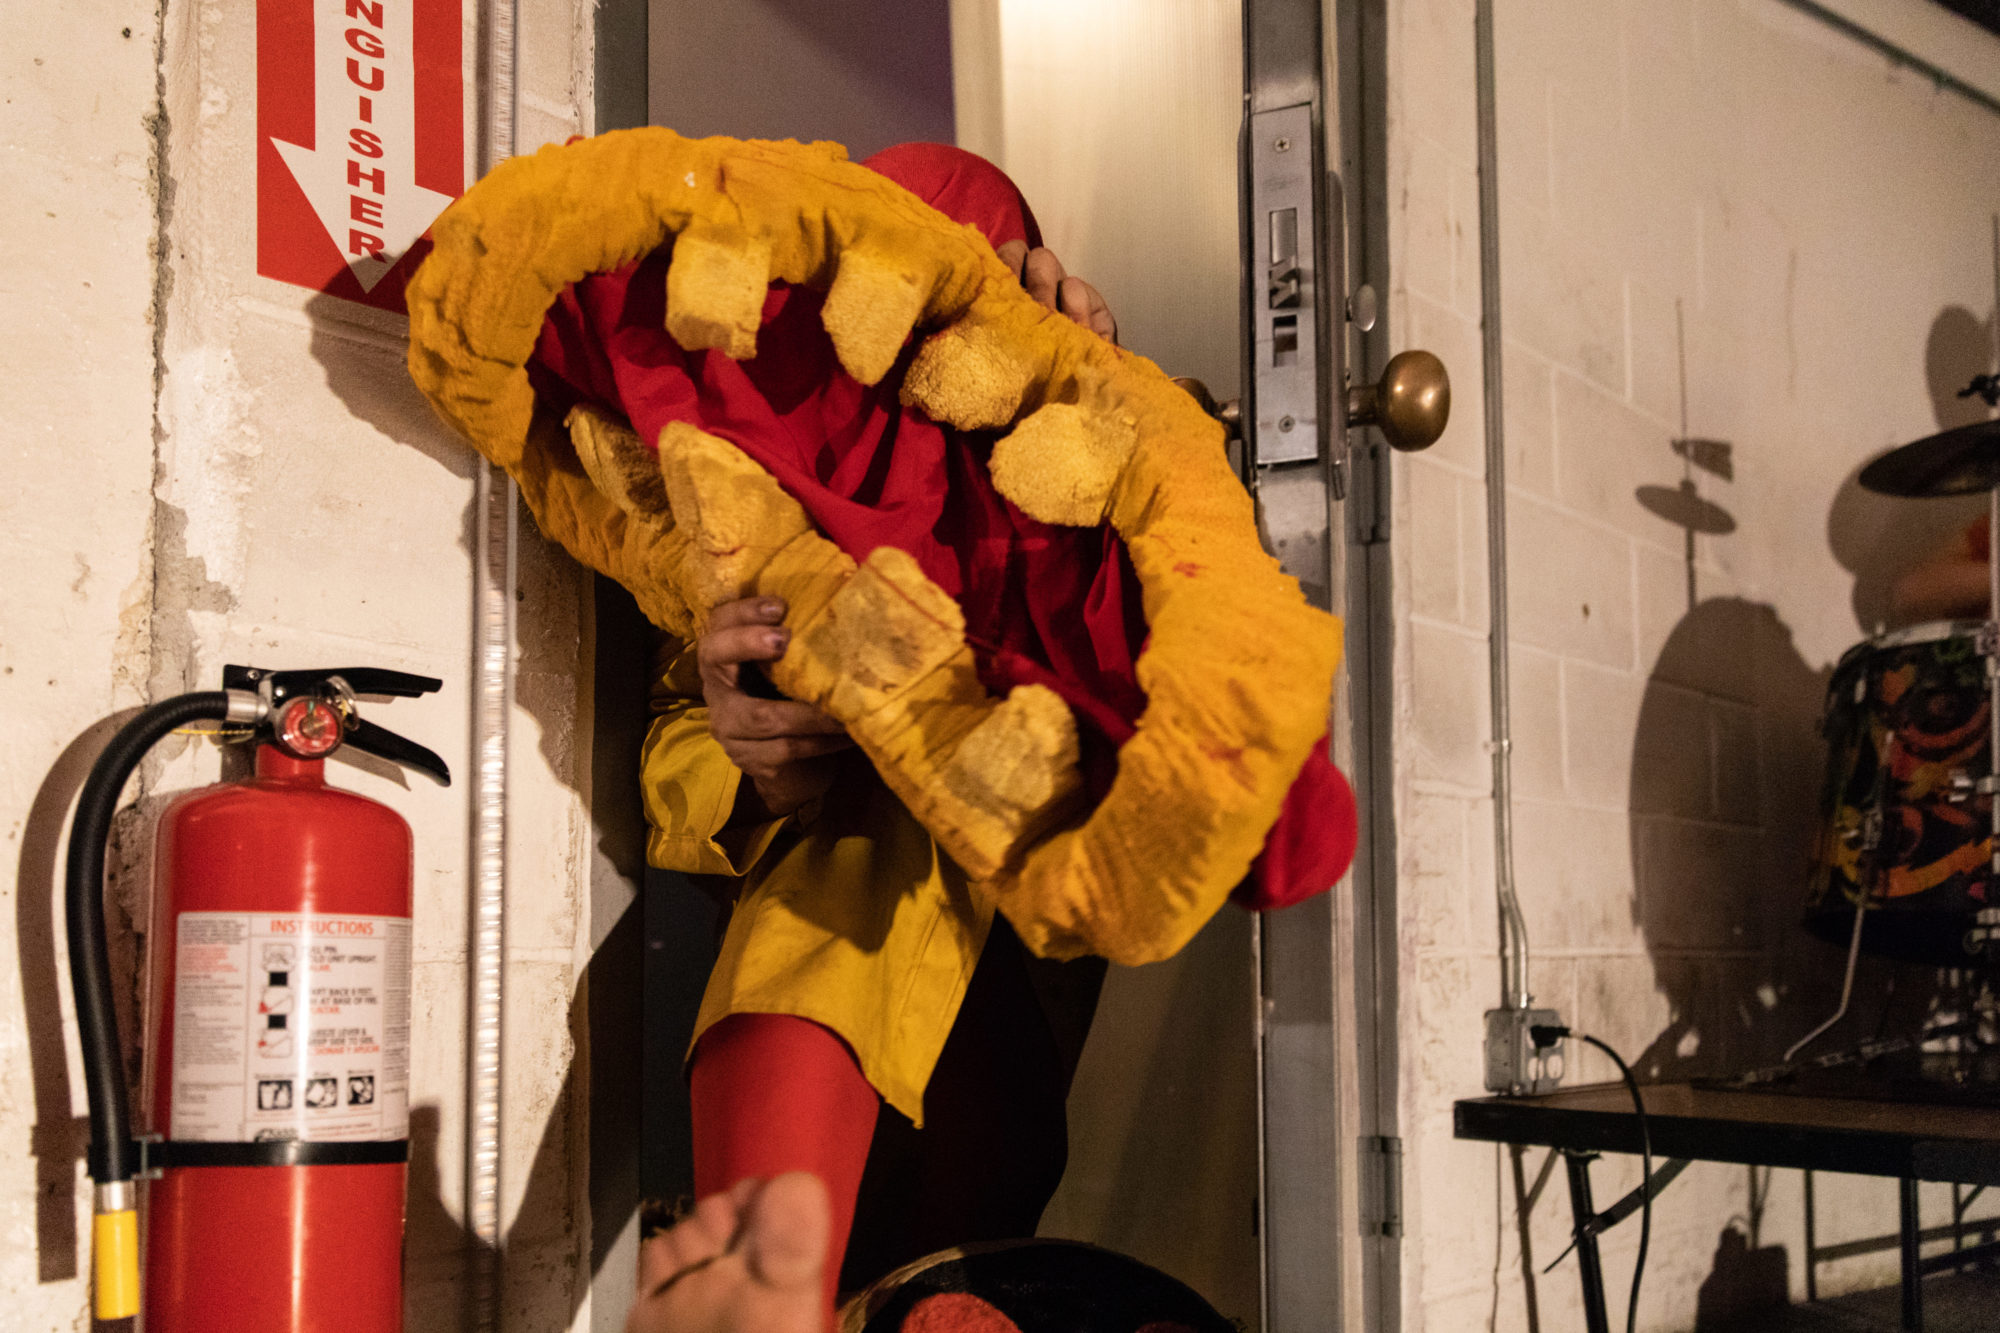 person dressed in red and yellow steps through a door holding a large red and yellow mouth